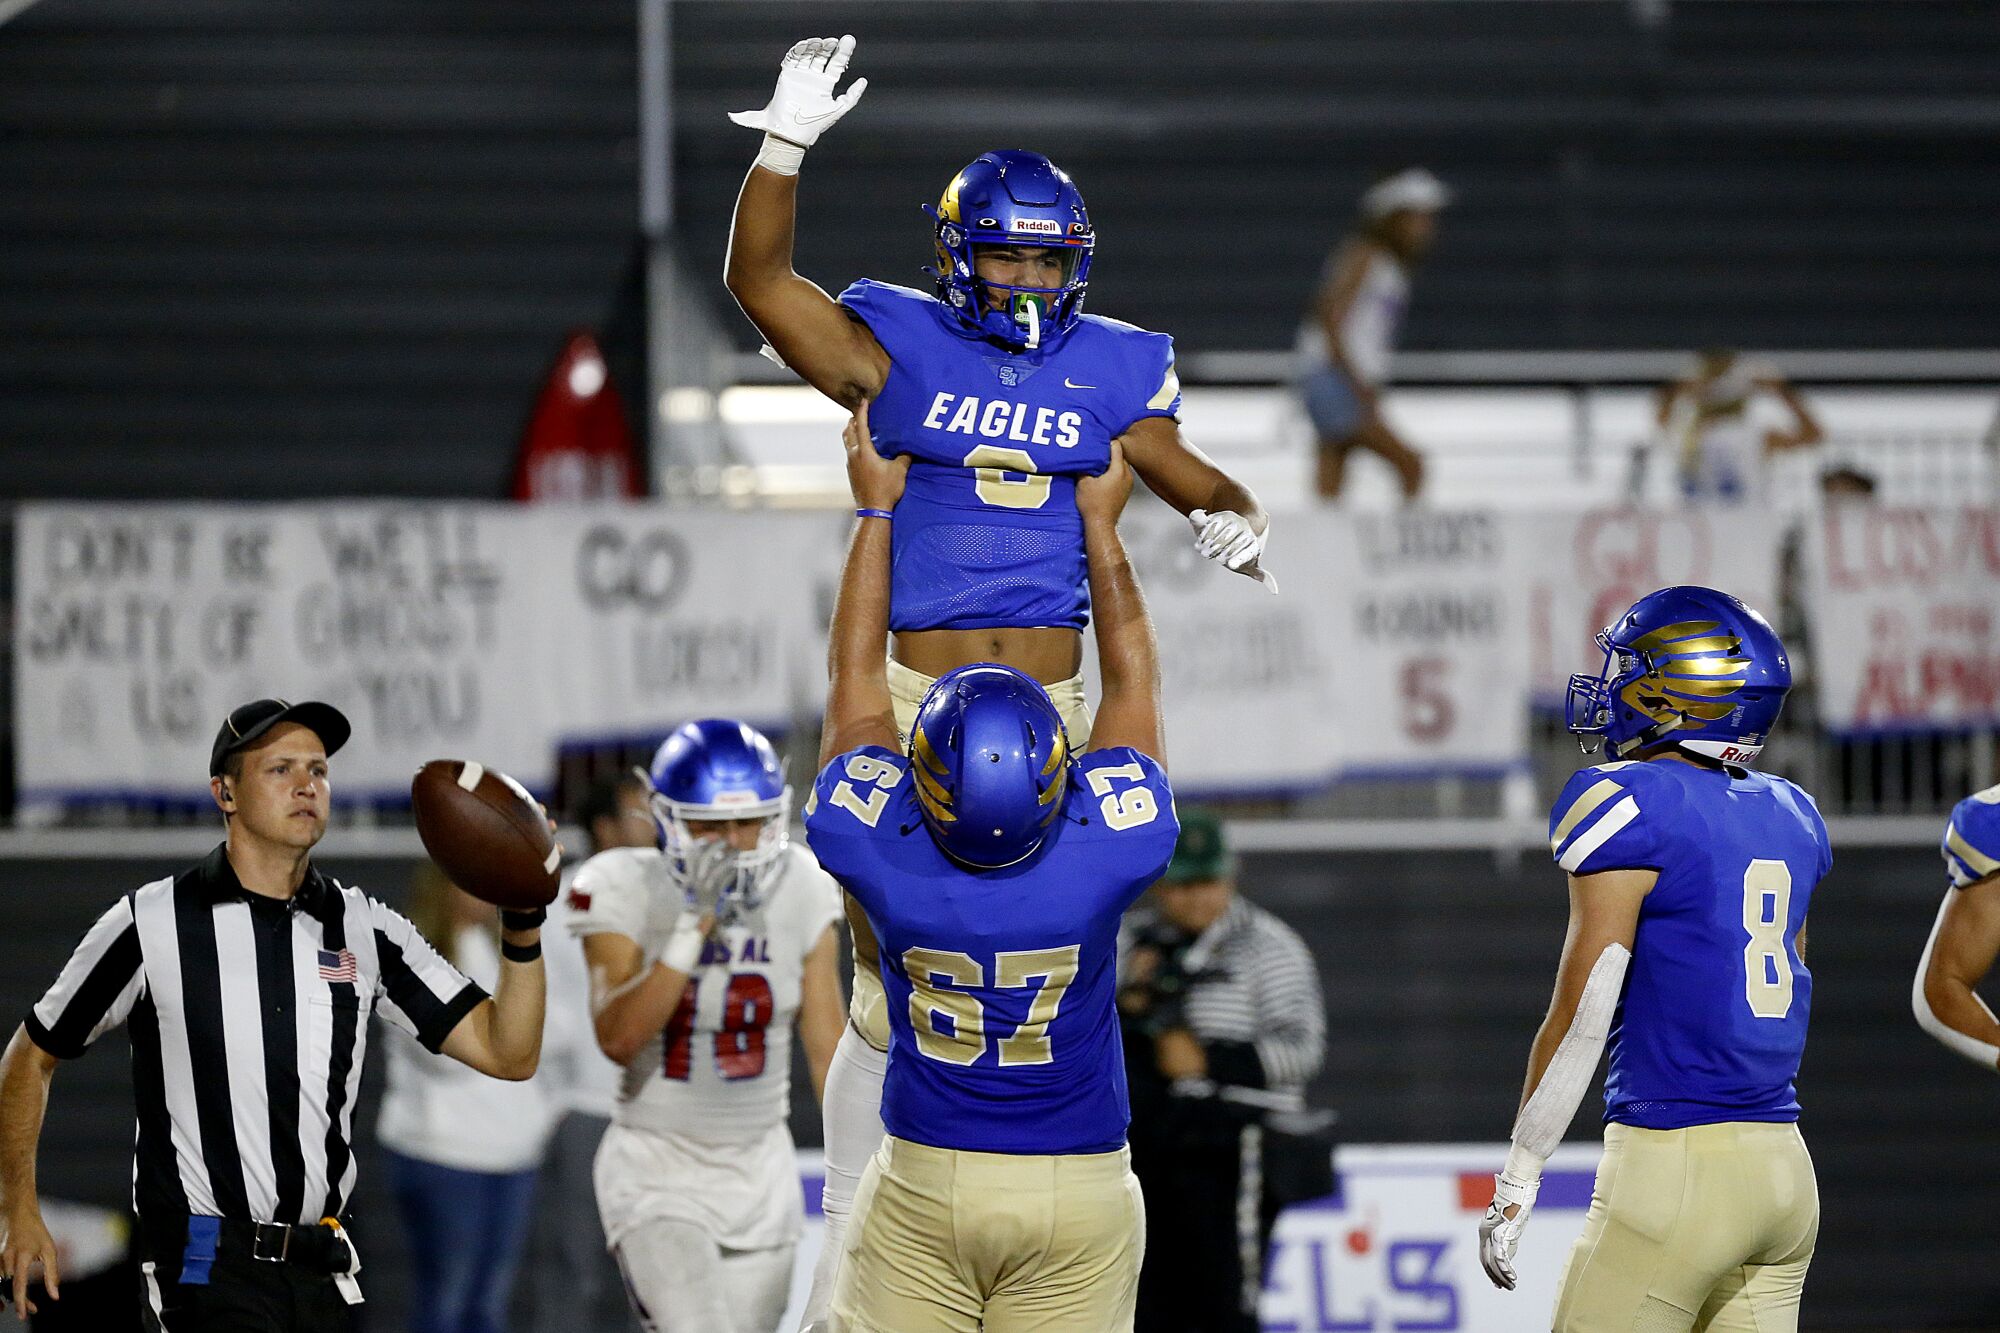 Santa Margarita tight end Nicholas Lopez is hoisted up in the air by Kilian O'Connor after catching a touchdown pass.